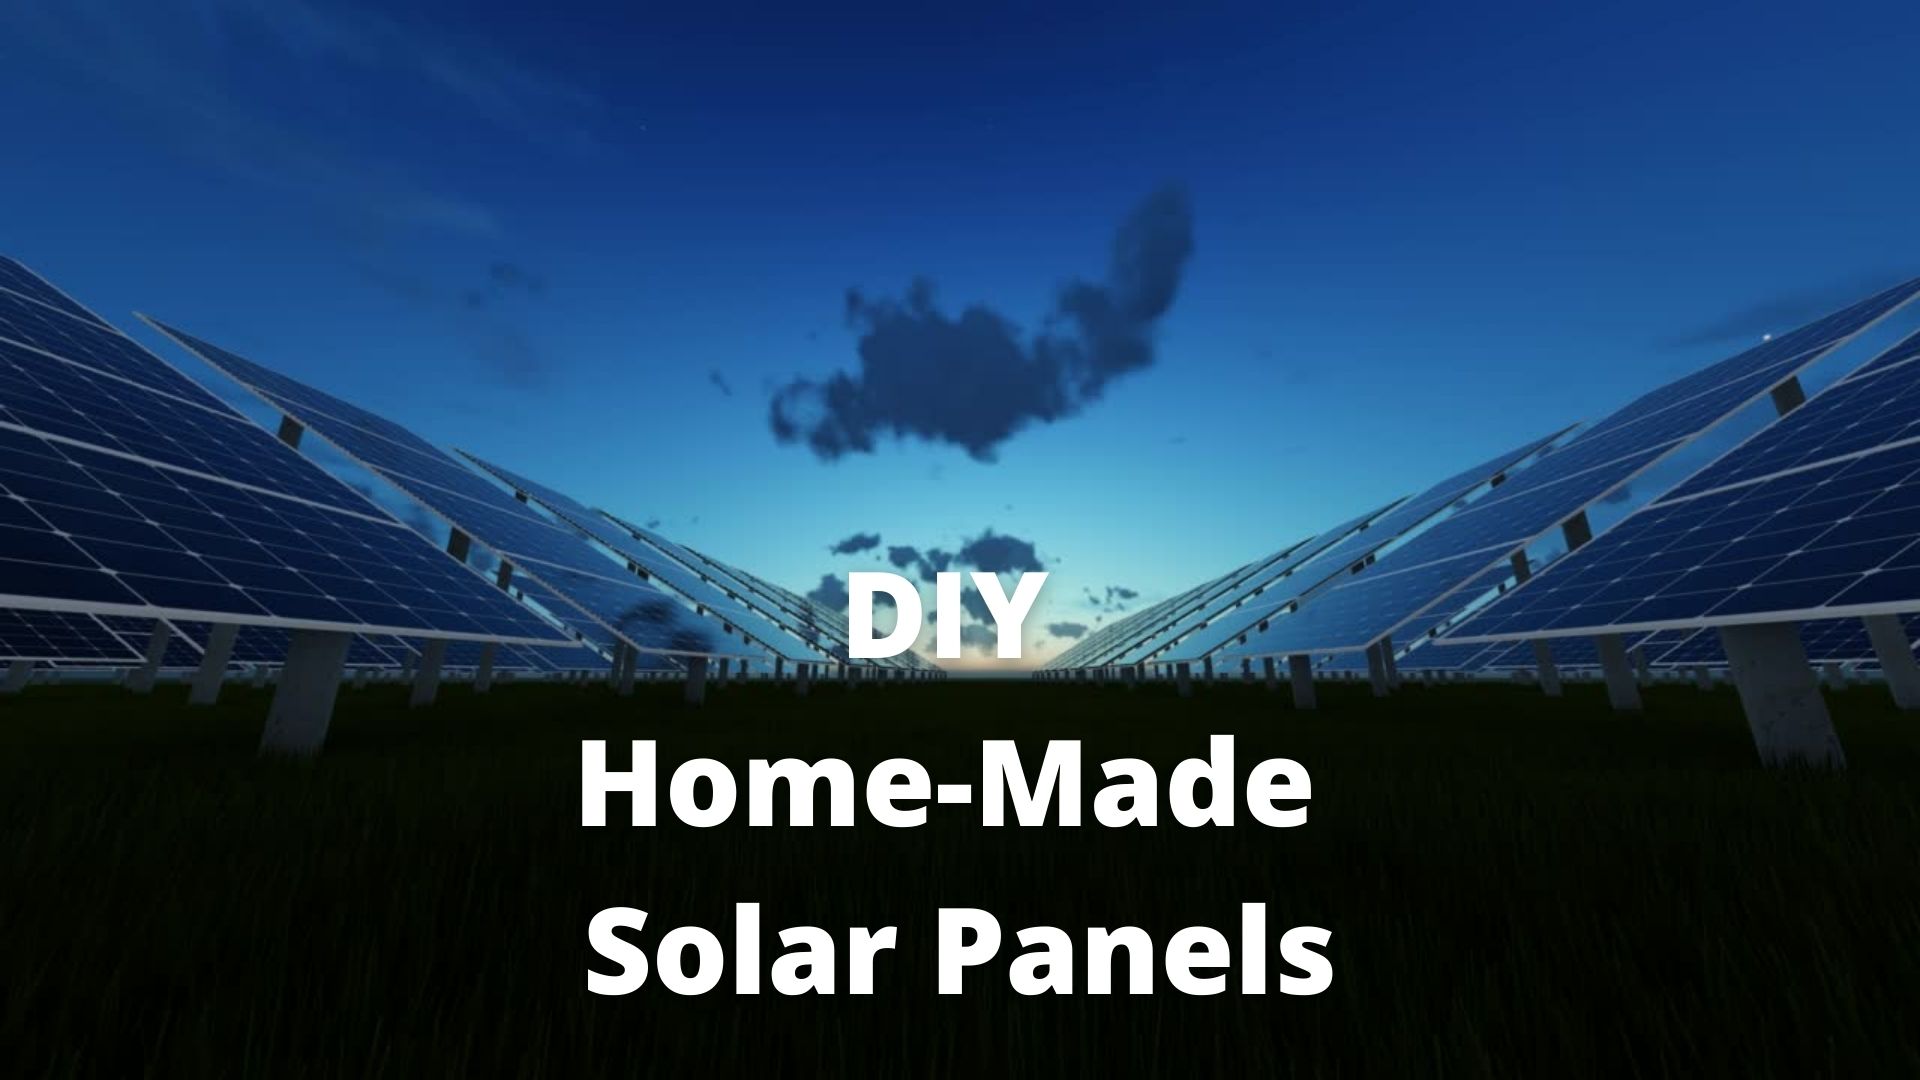 Building Your Own Home-Made Solar Panels